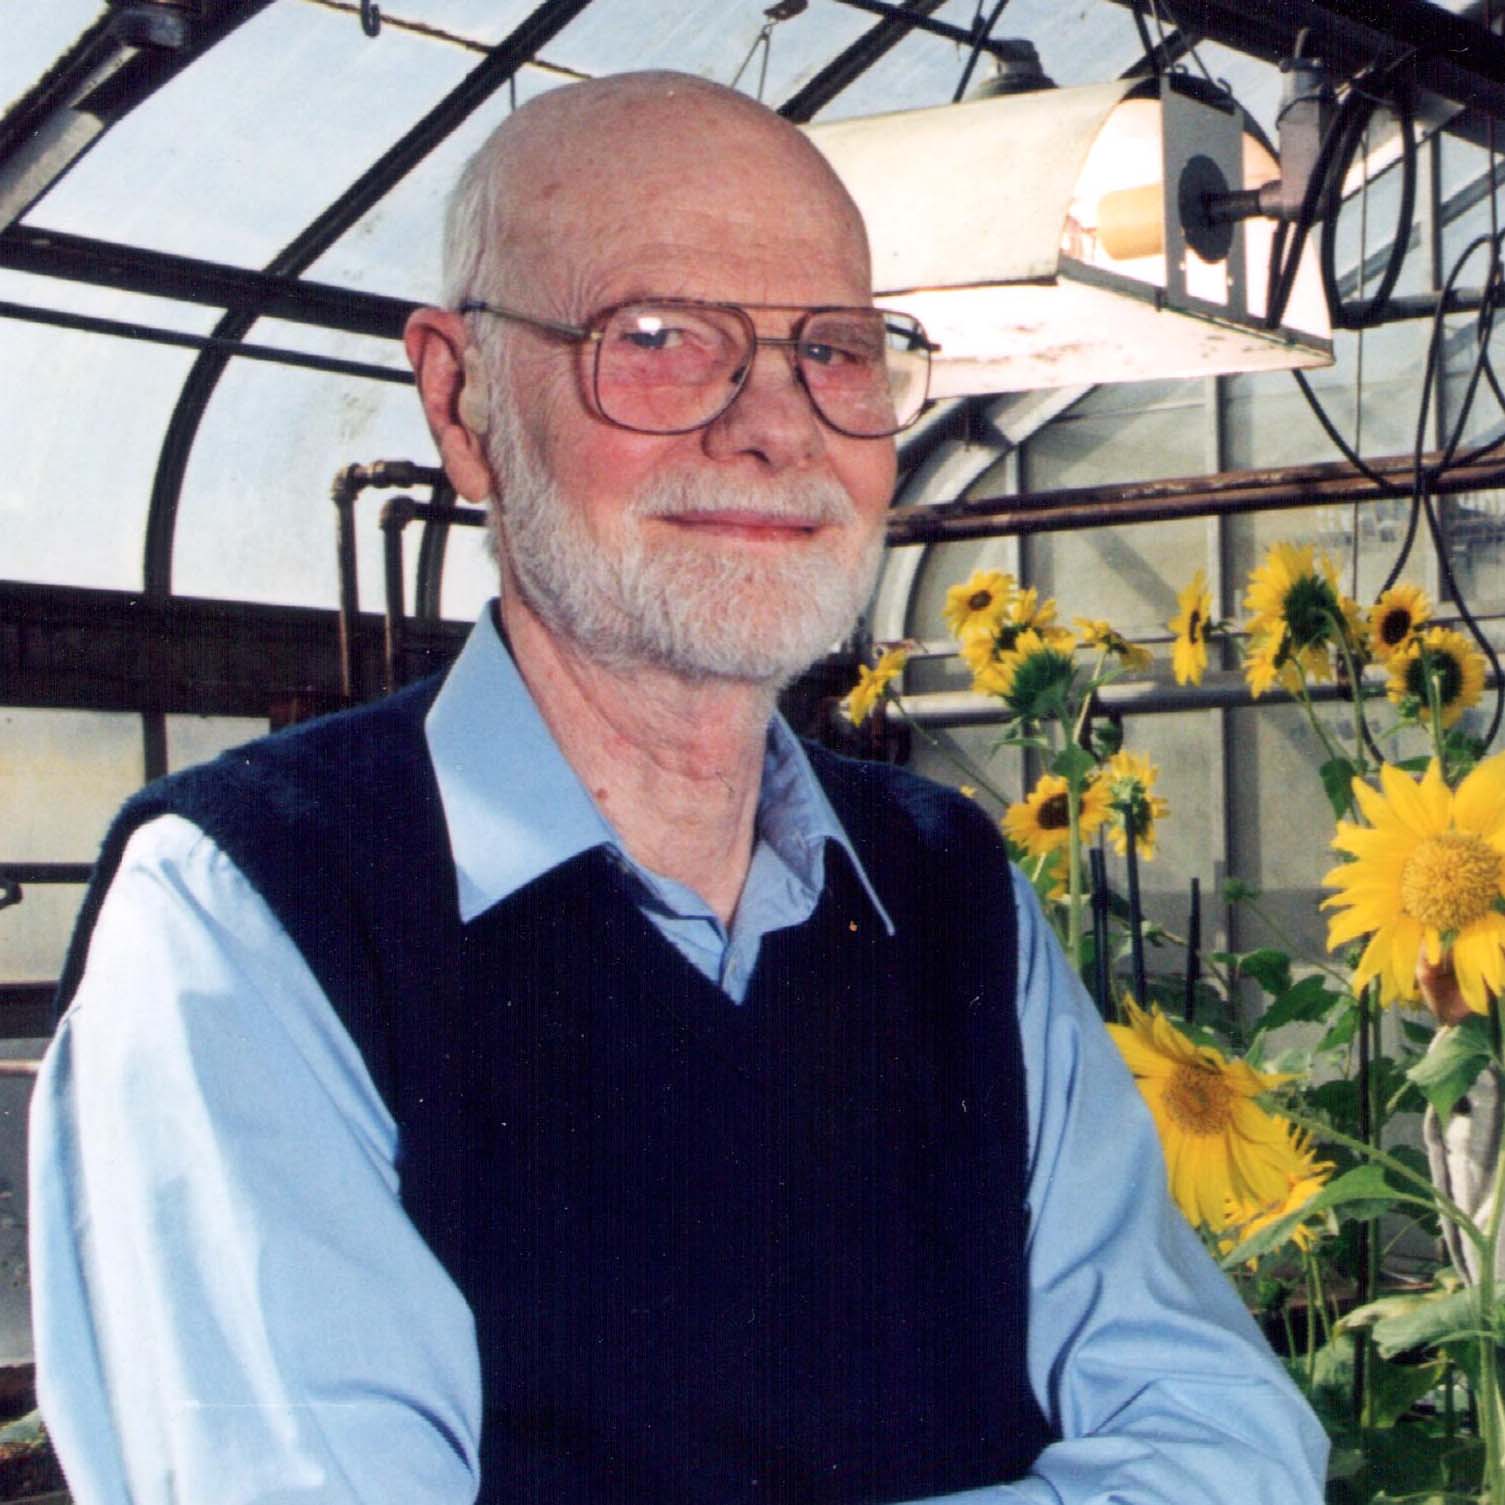 Charlie Heiser in greenhouse with sunflowers.